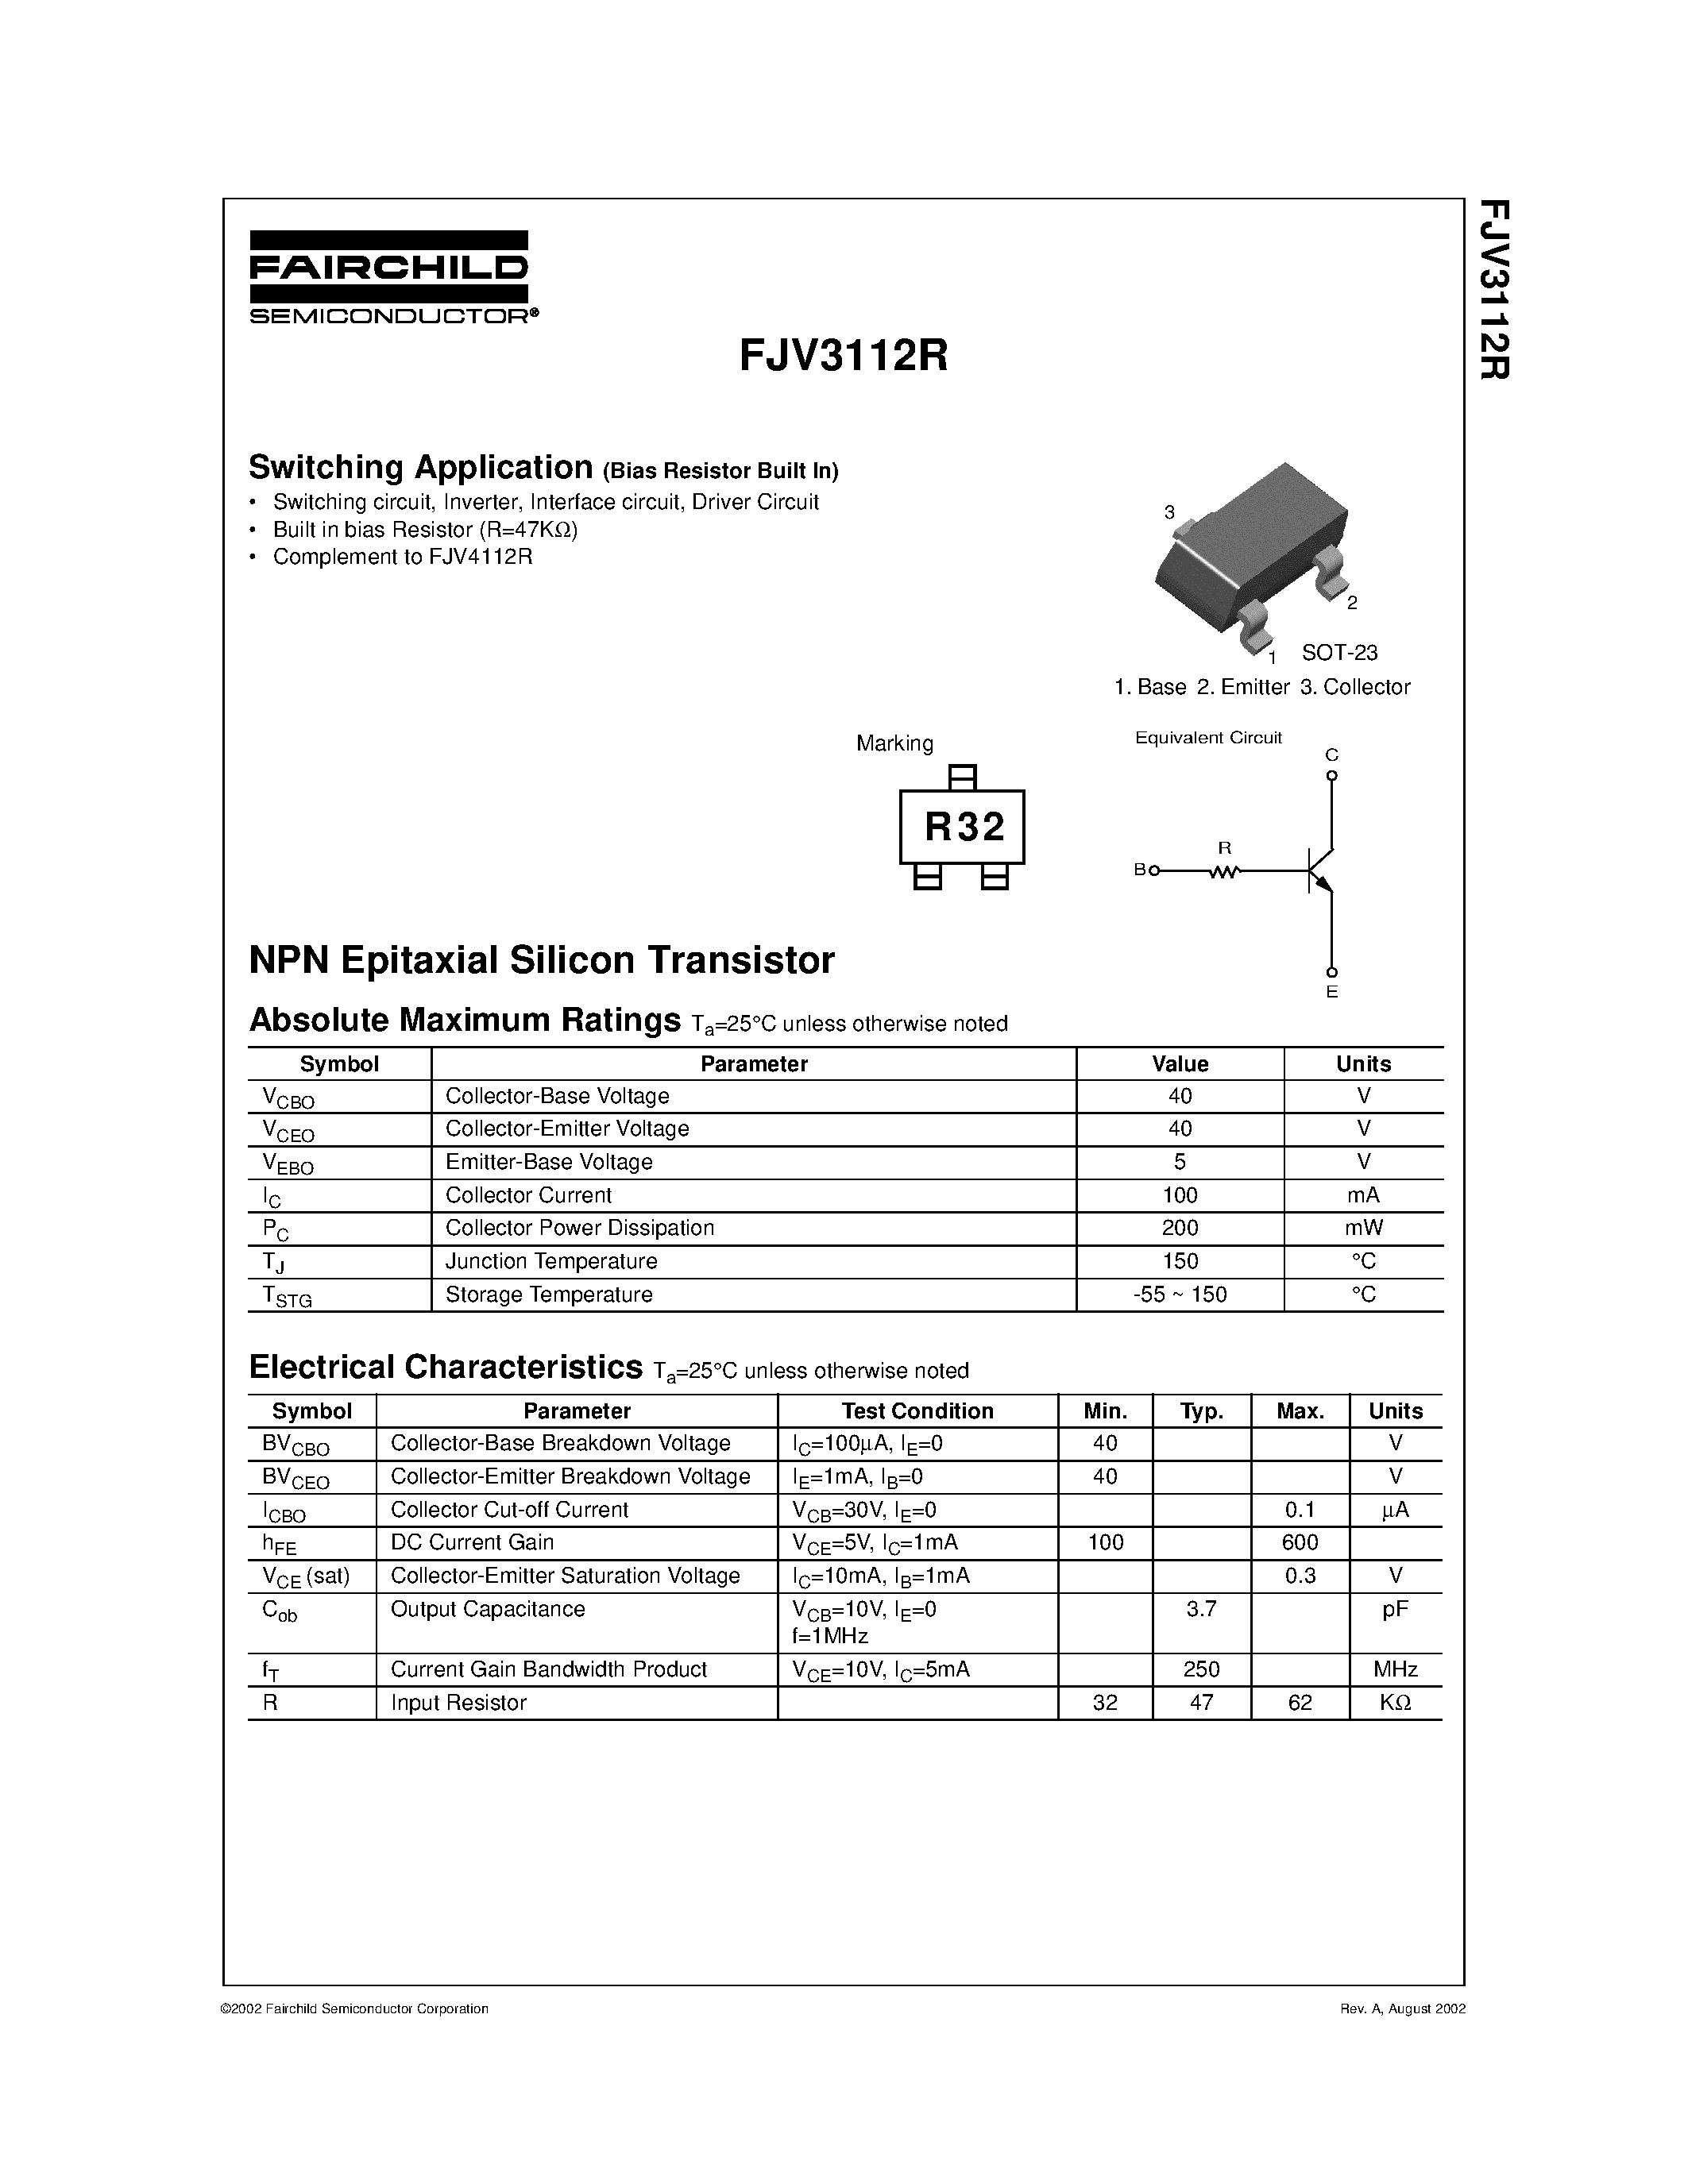 Datasheet FJV3112R - NPN Epitaxial Silicon Transistor page 1